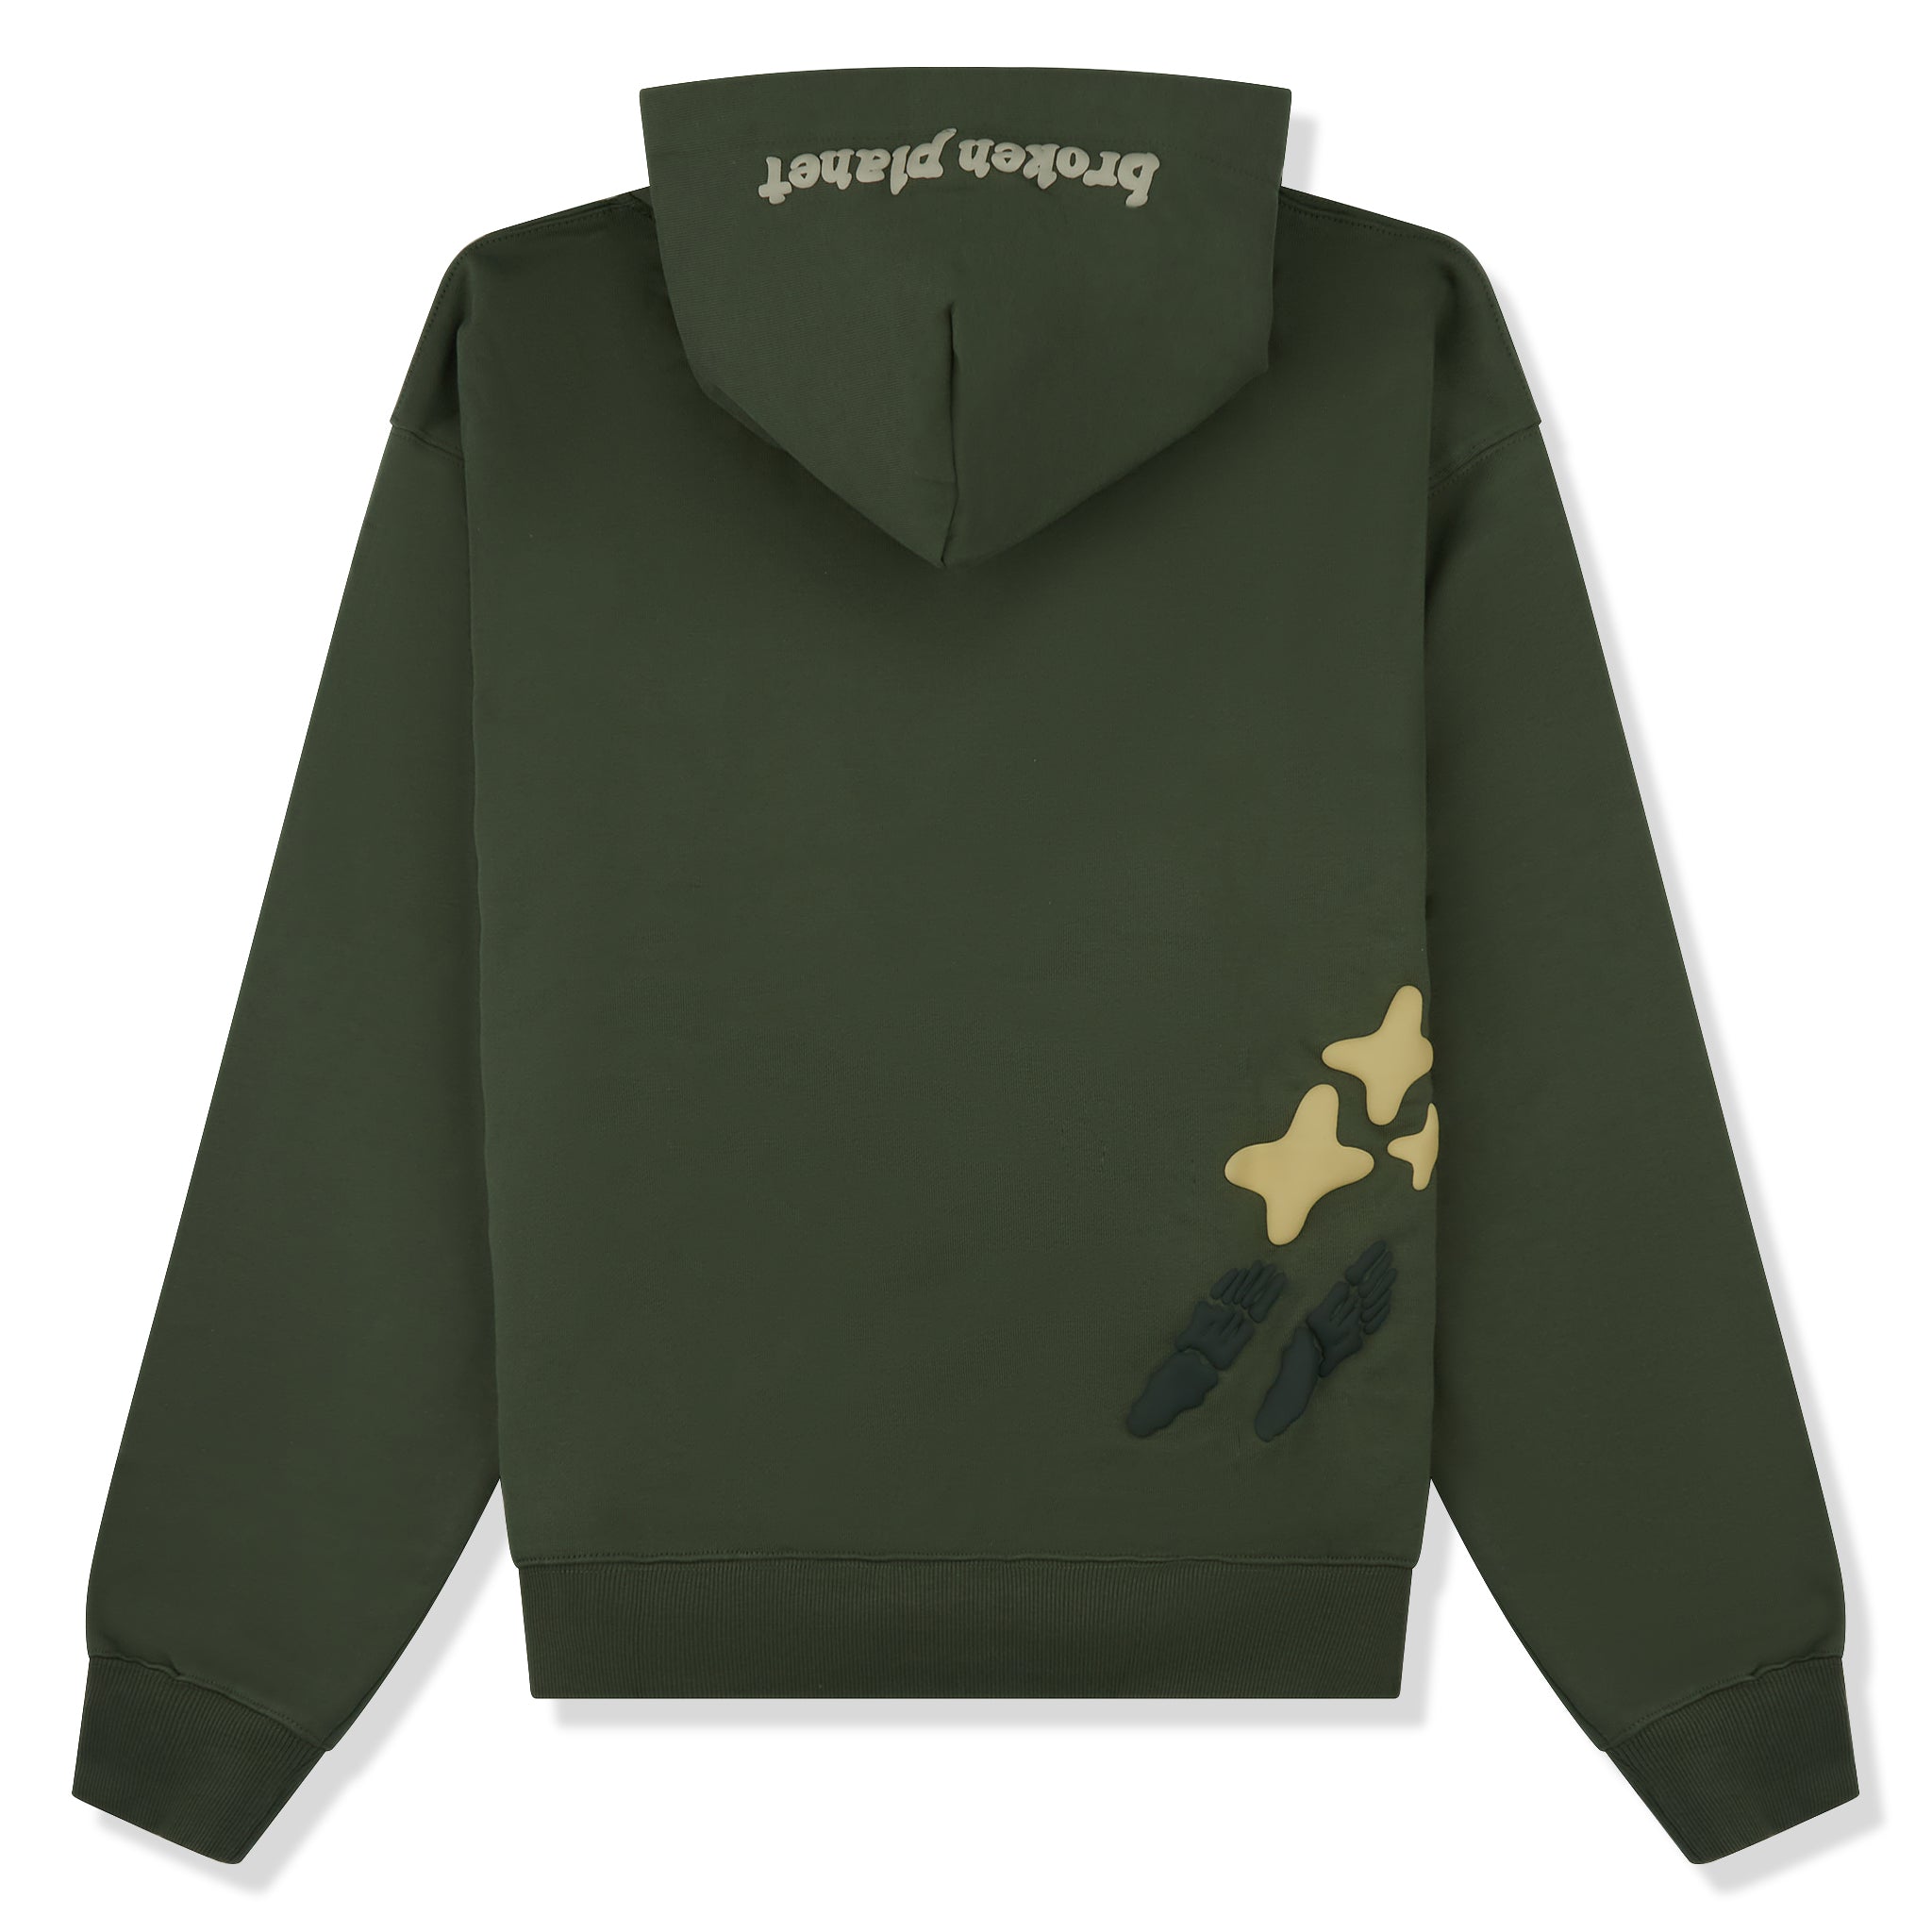 Image of Broken Planet Space Trails Olive Green Hoodie